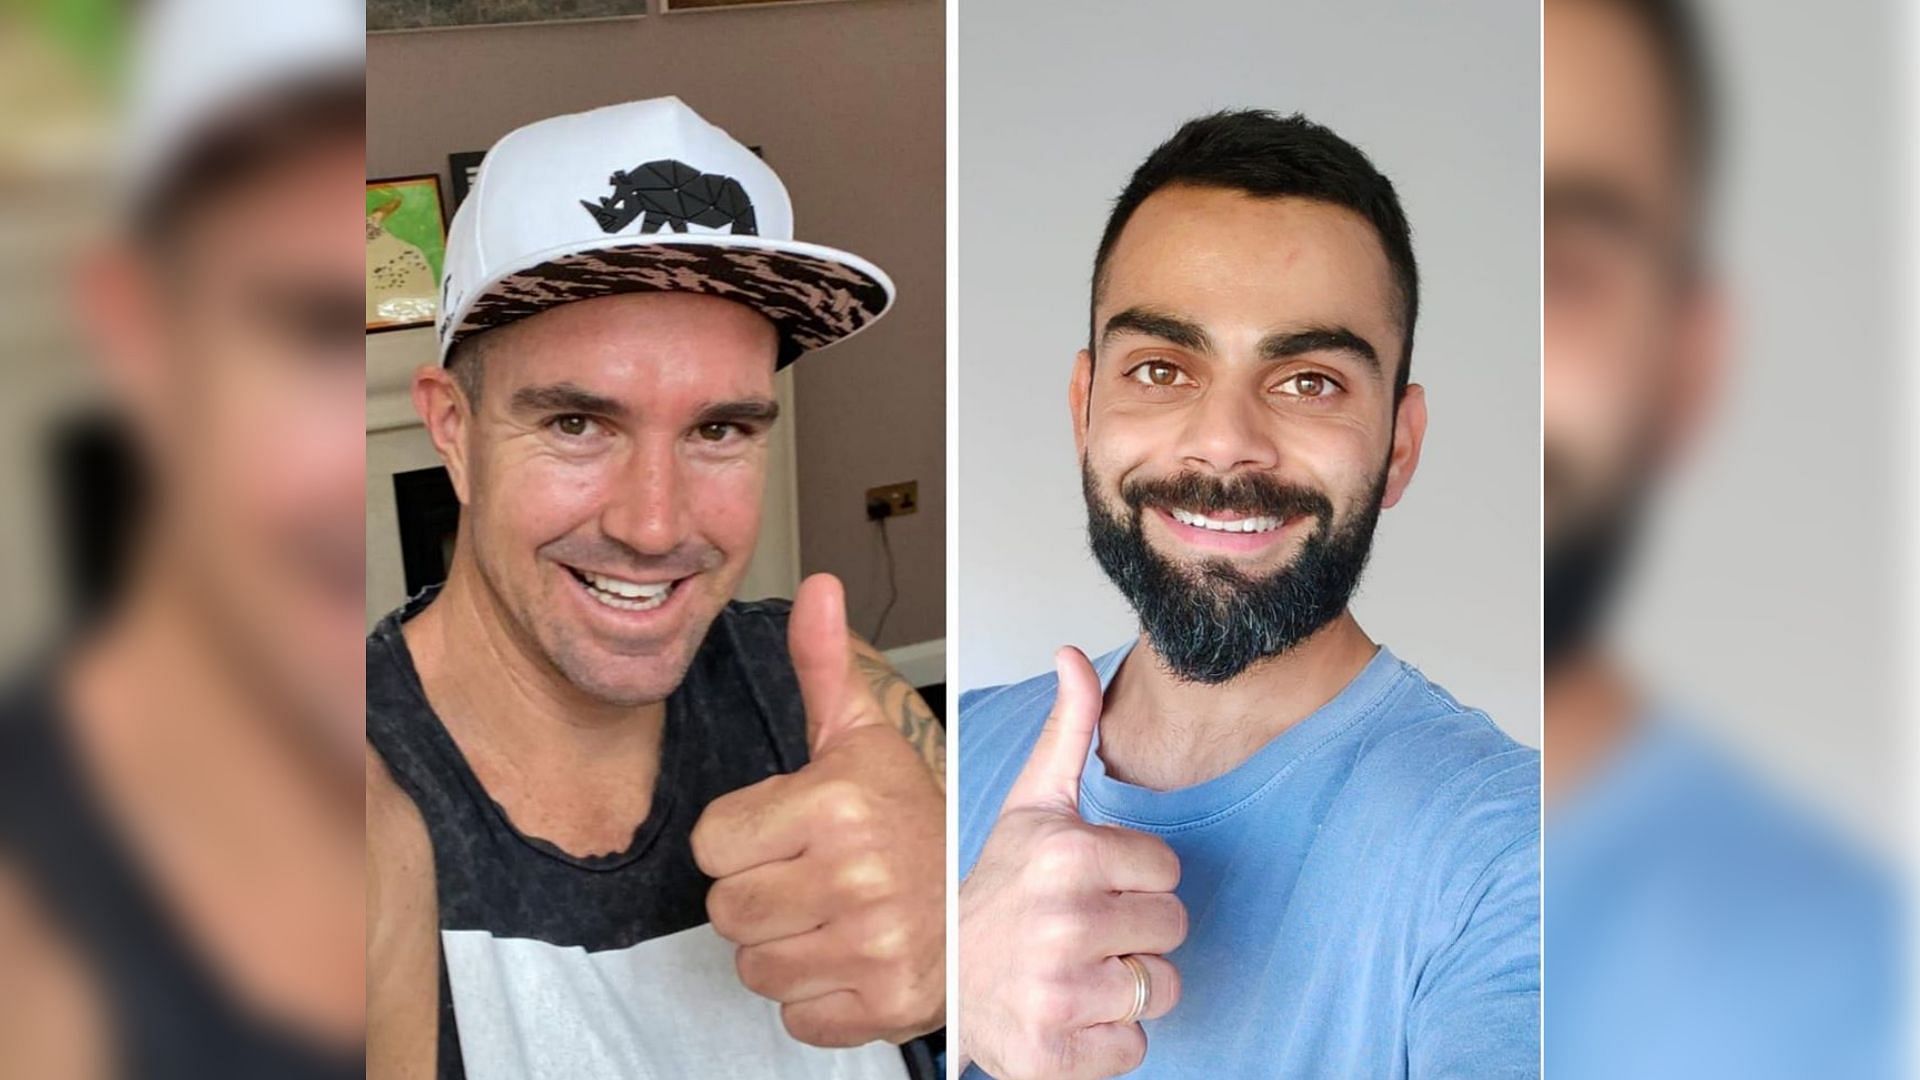 Kevin Pietersen hosted an instagram live chat with Virat Kohli for over an hour on Thursday.